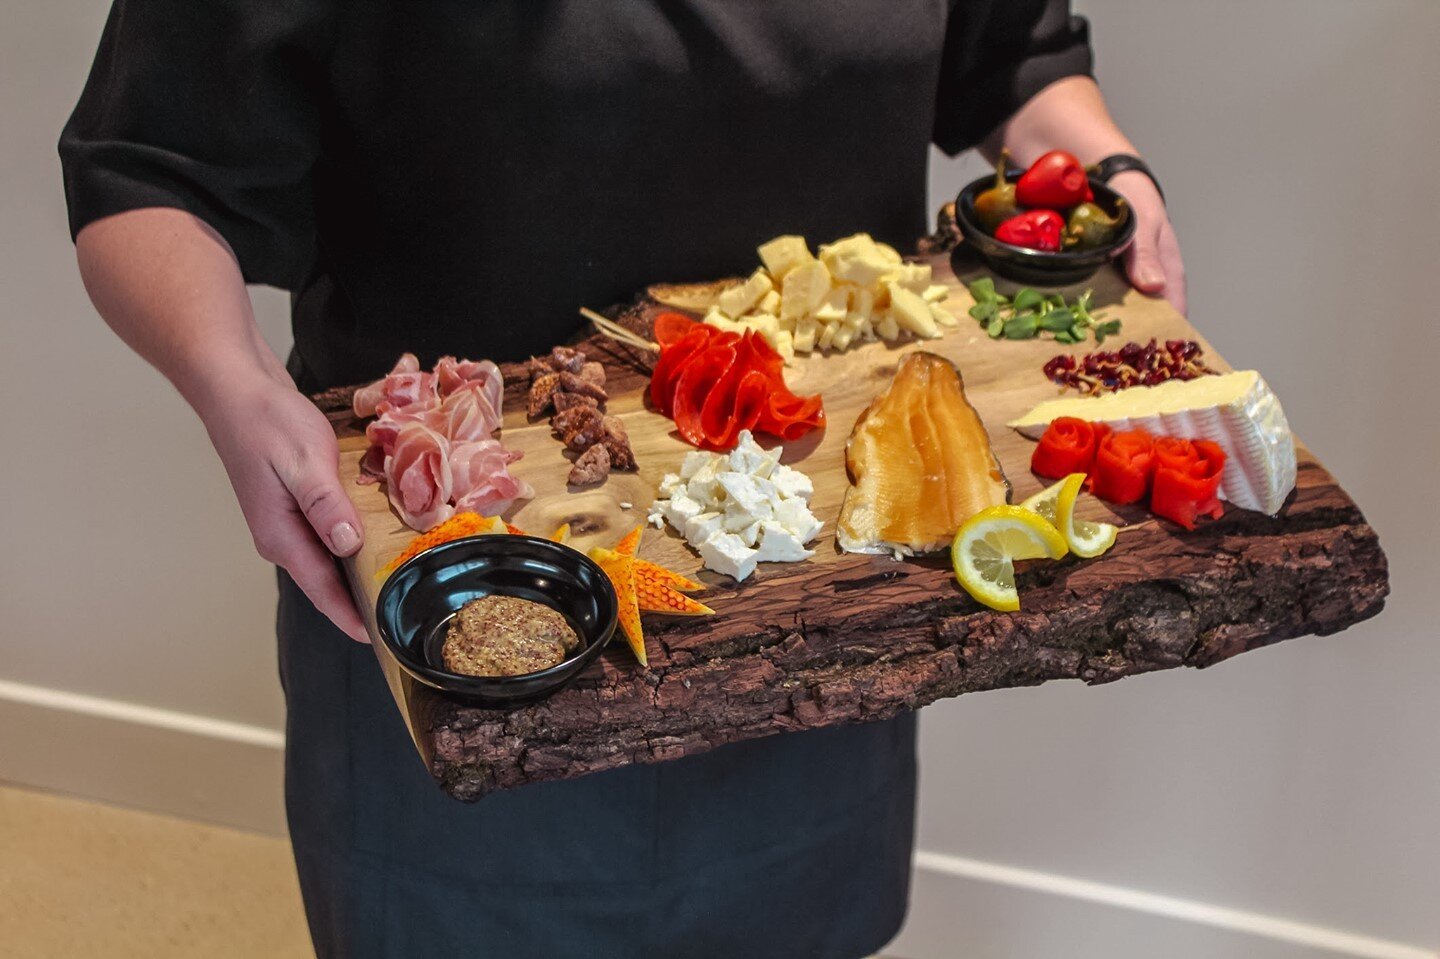 You're looking awfully charCUTE-rie today! Adding a grazing board to your event is a perfect way to satisfy the taste palettes of all of your guests. 
-
-
#CharcuterieBoards
#ColoradoCatering 
#ColoradoEvents
#NOCOEventVenue